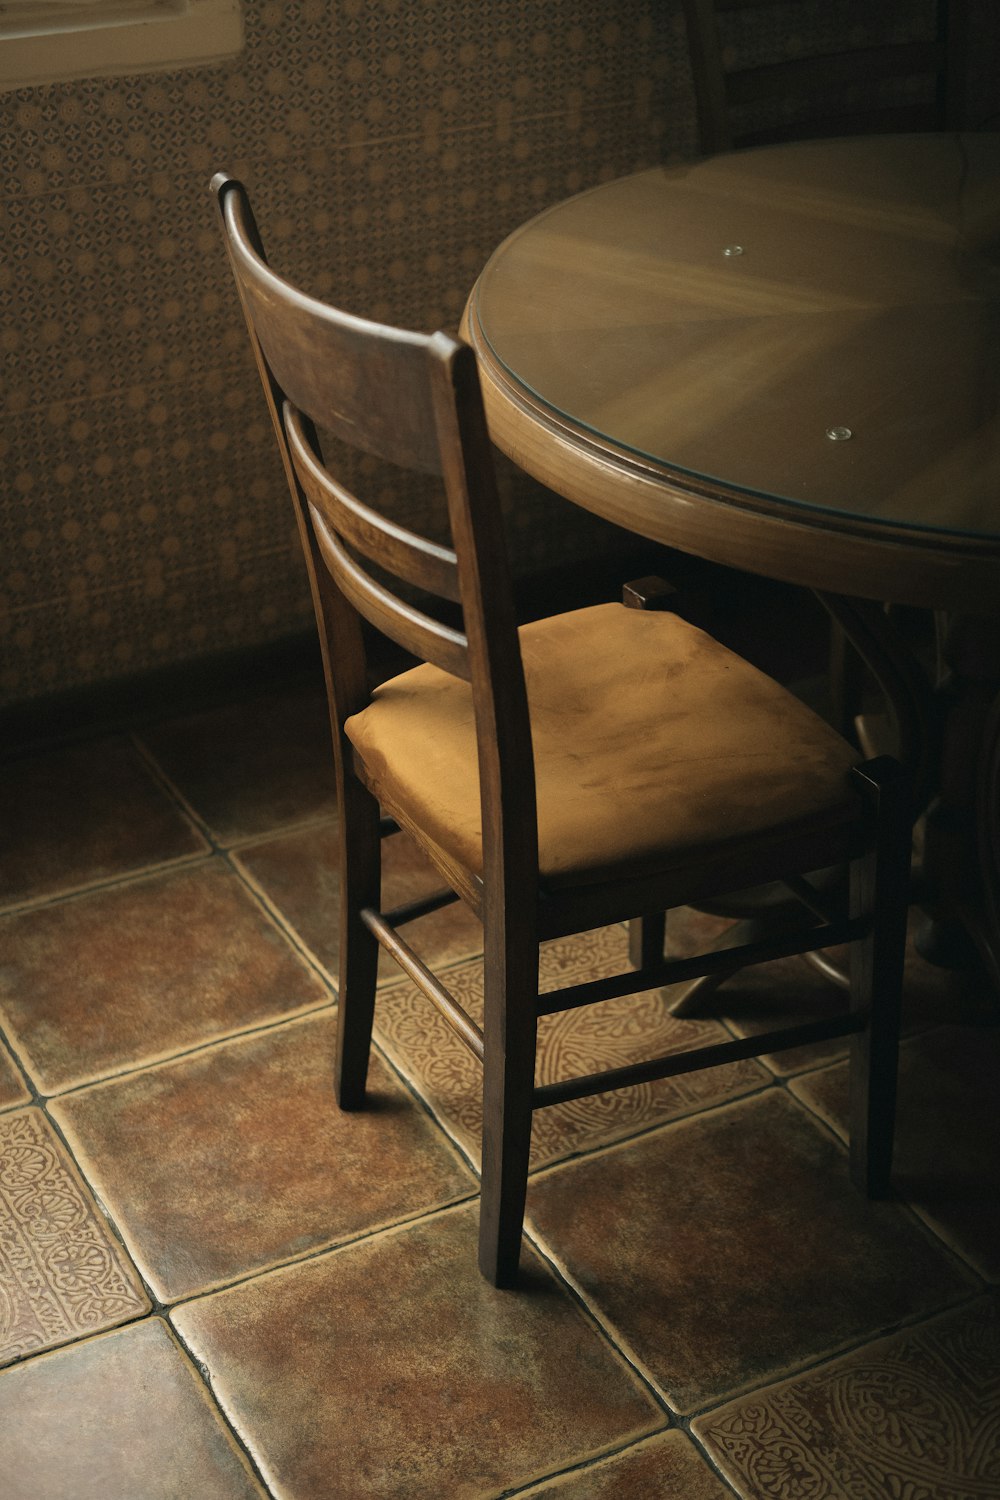 a wooden chair sitting at a round table